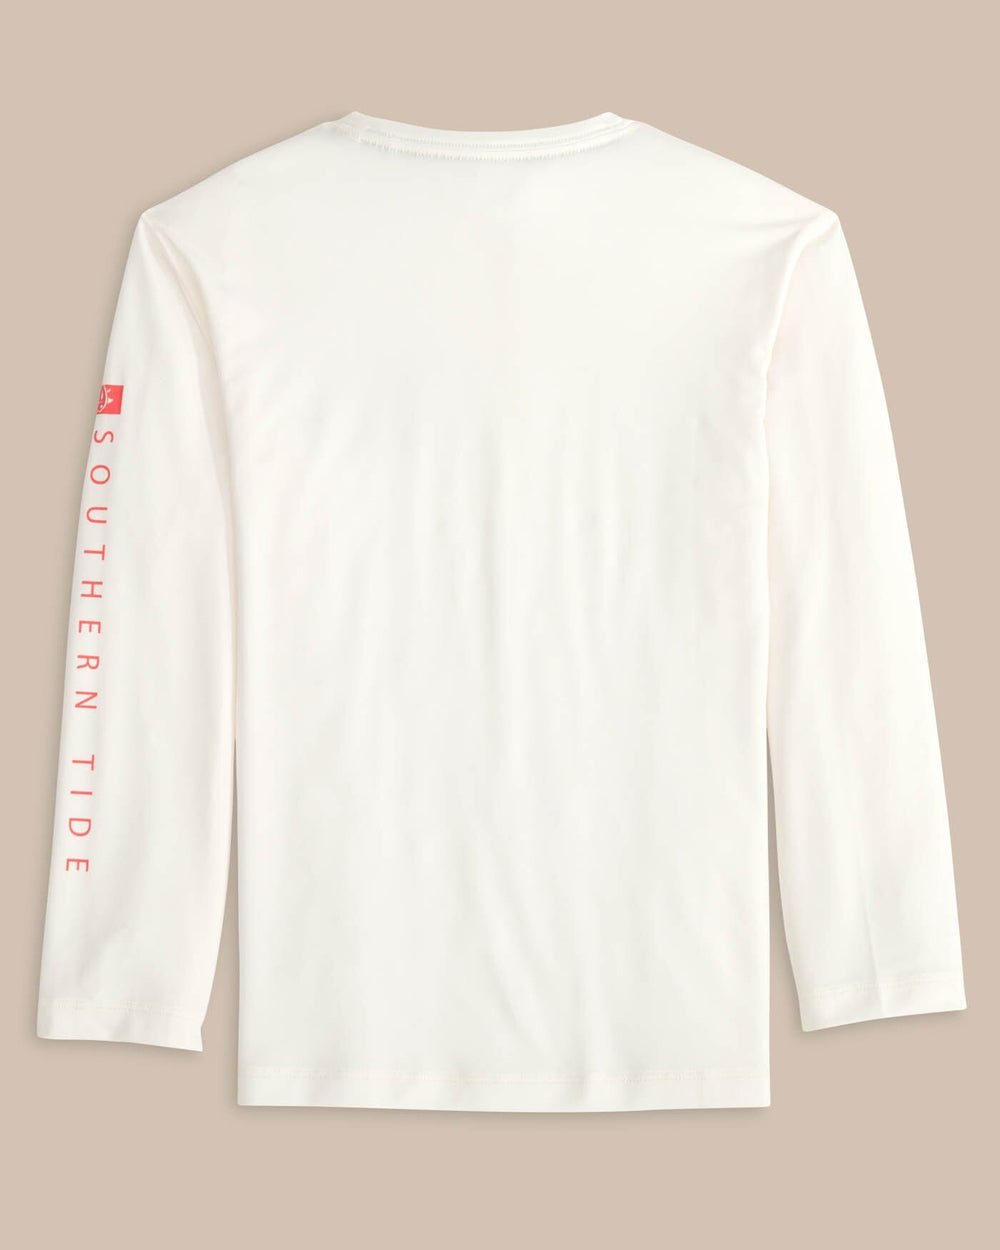 The back view of the Southern Tide Kids Boxed Chest Performance Long Sleeve T-Shirt by Southern Tide - Sand White